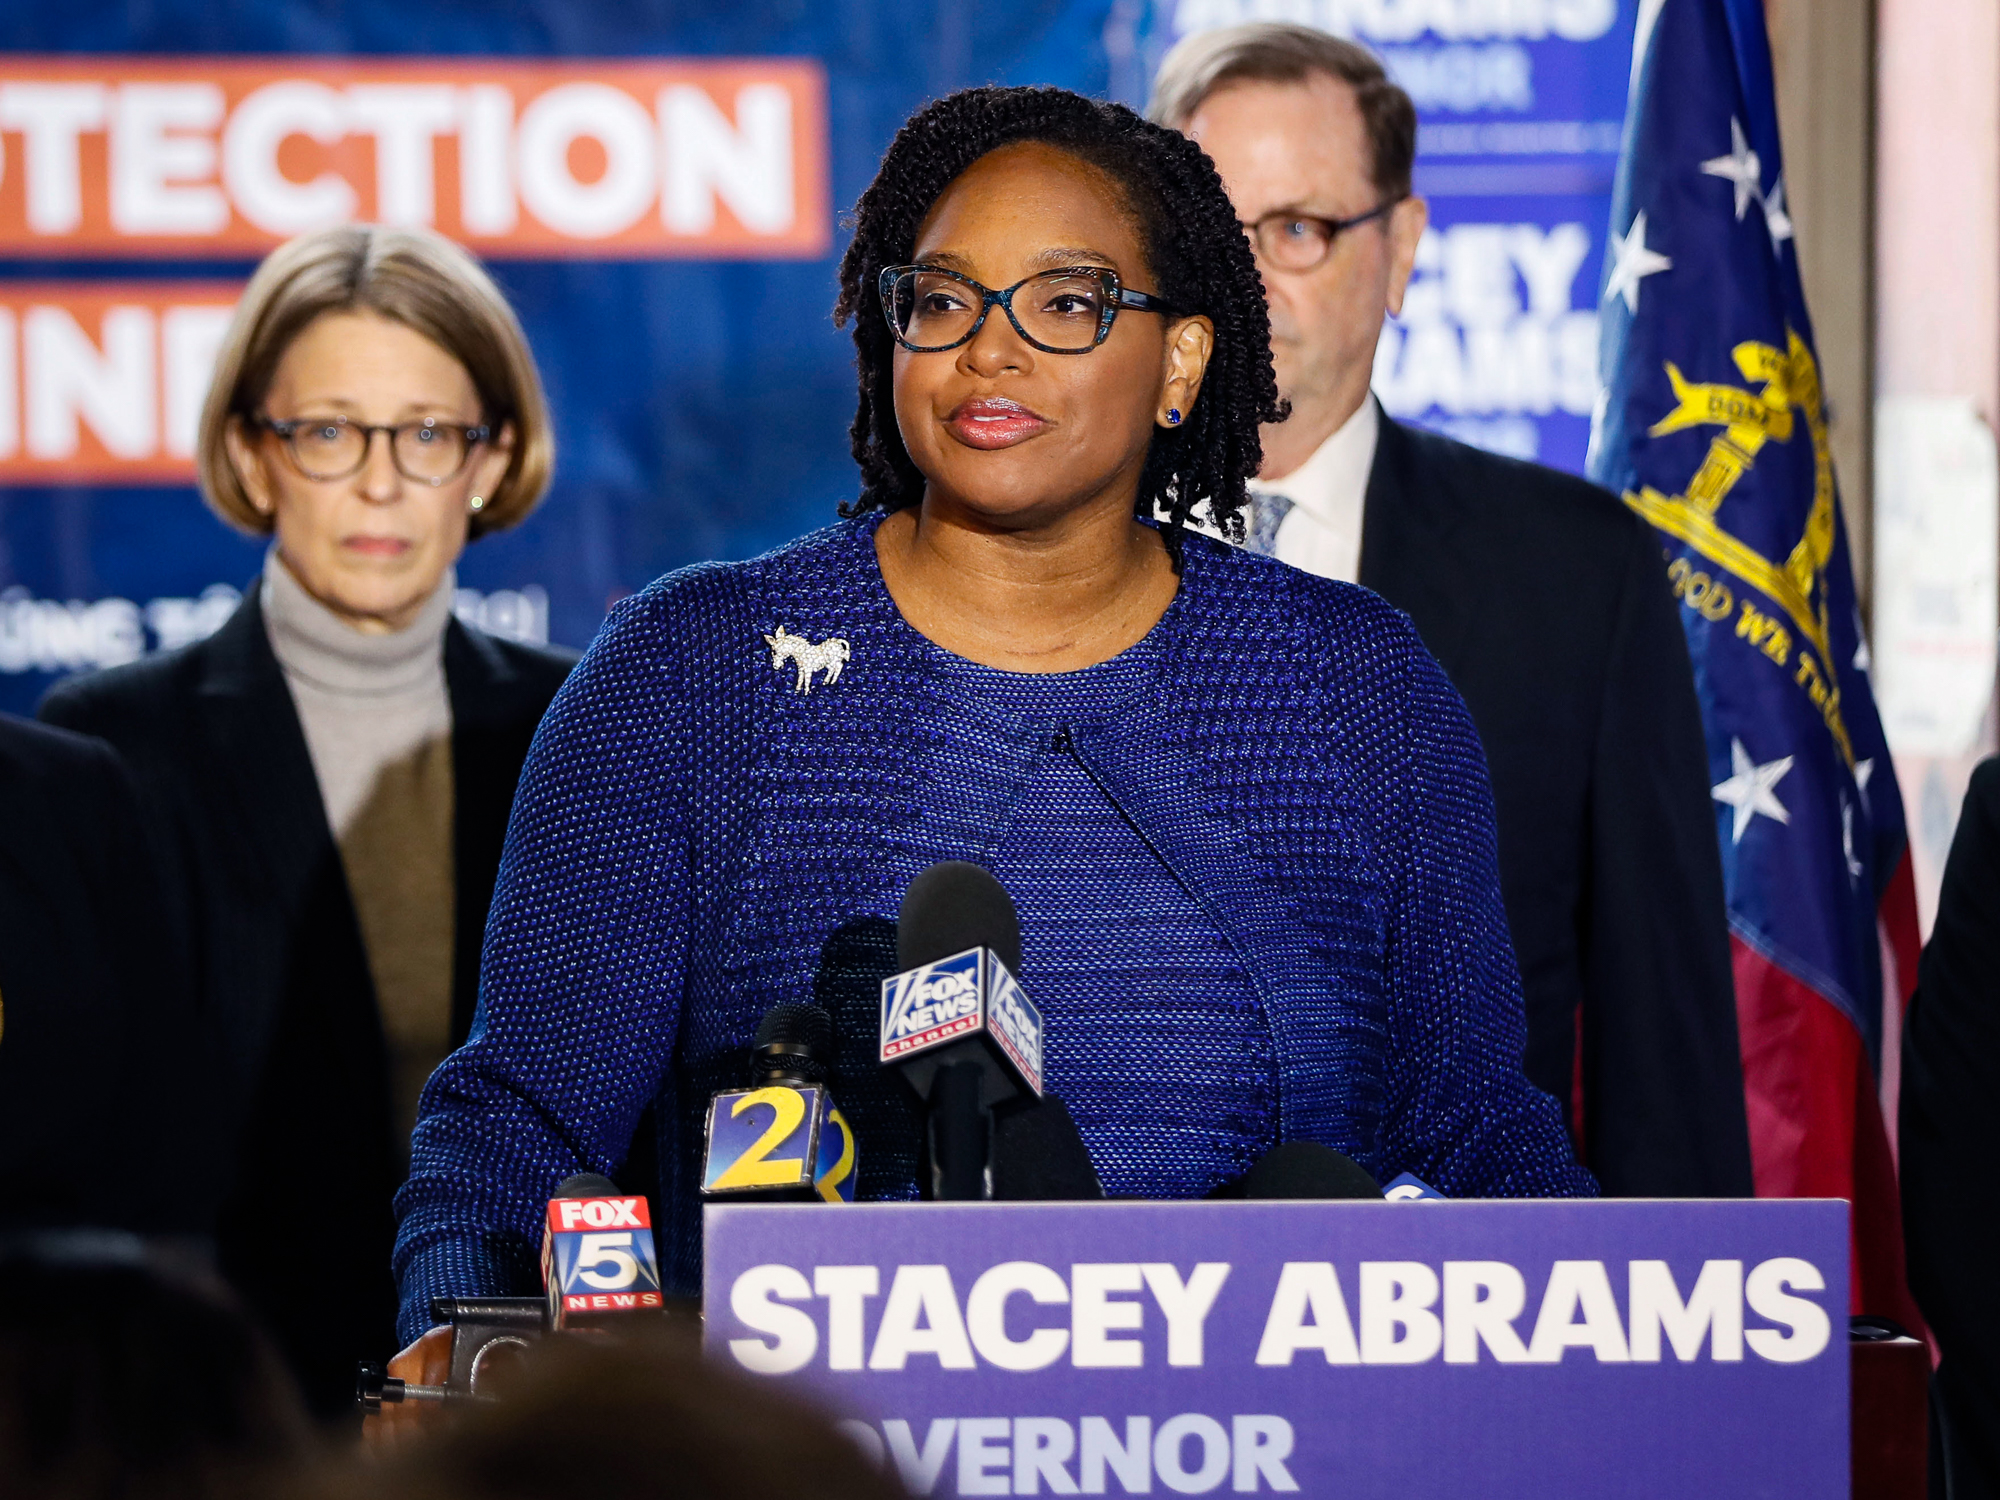 Allegra Lawrence-Hardy was at the forefront of Abrams’ effort to combat suppression from the start, according to Abrams aides.